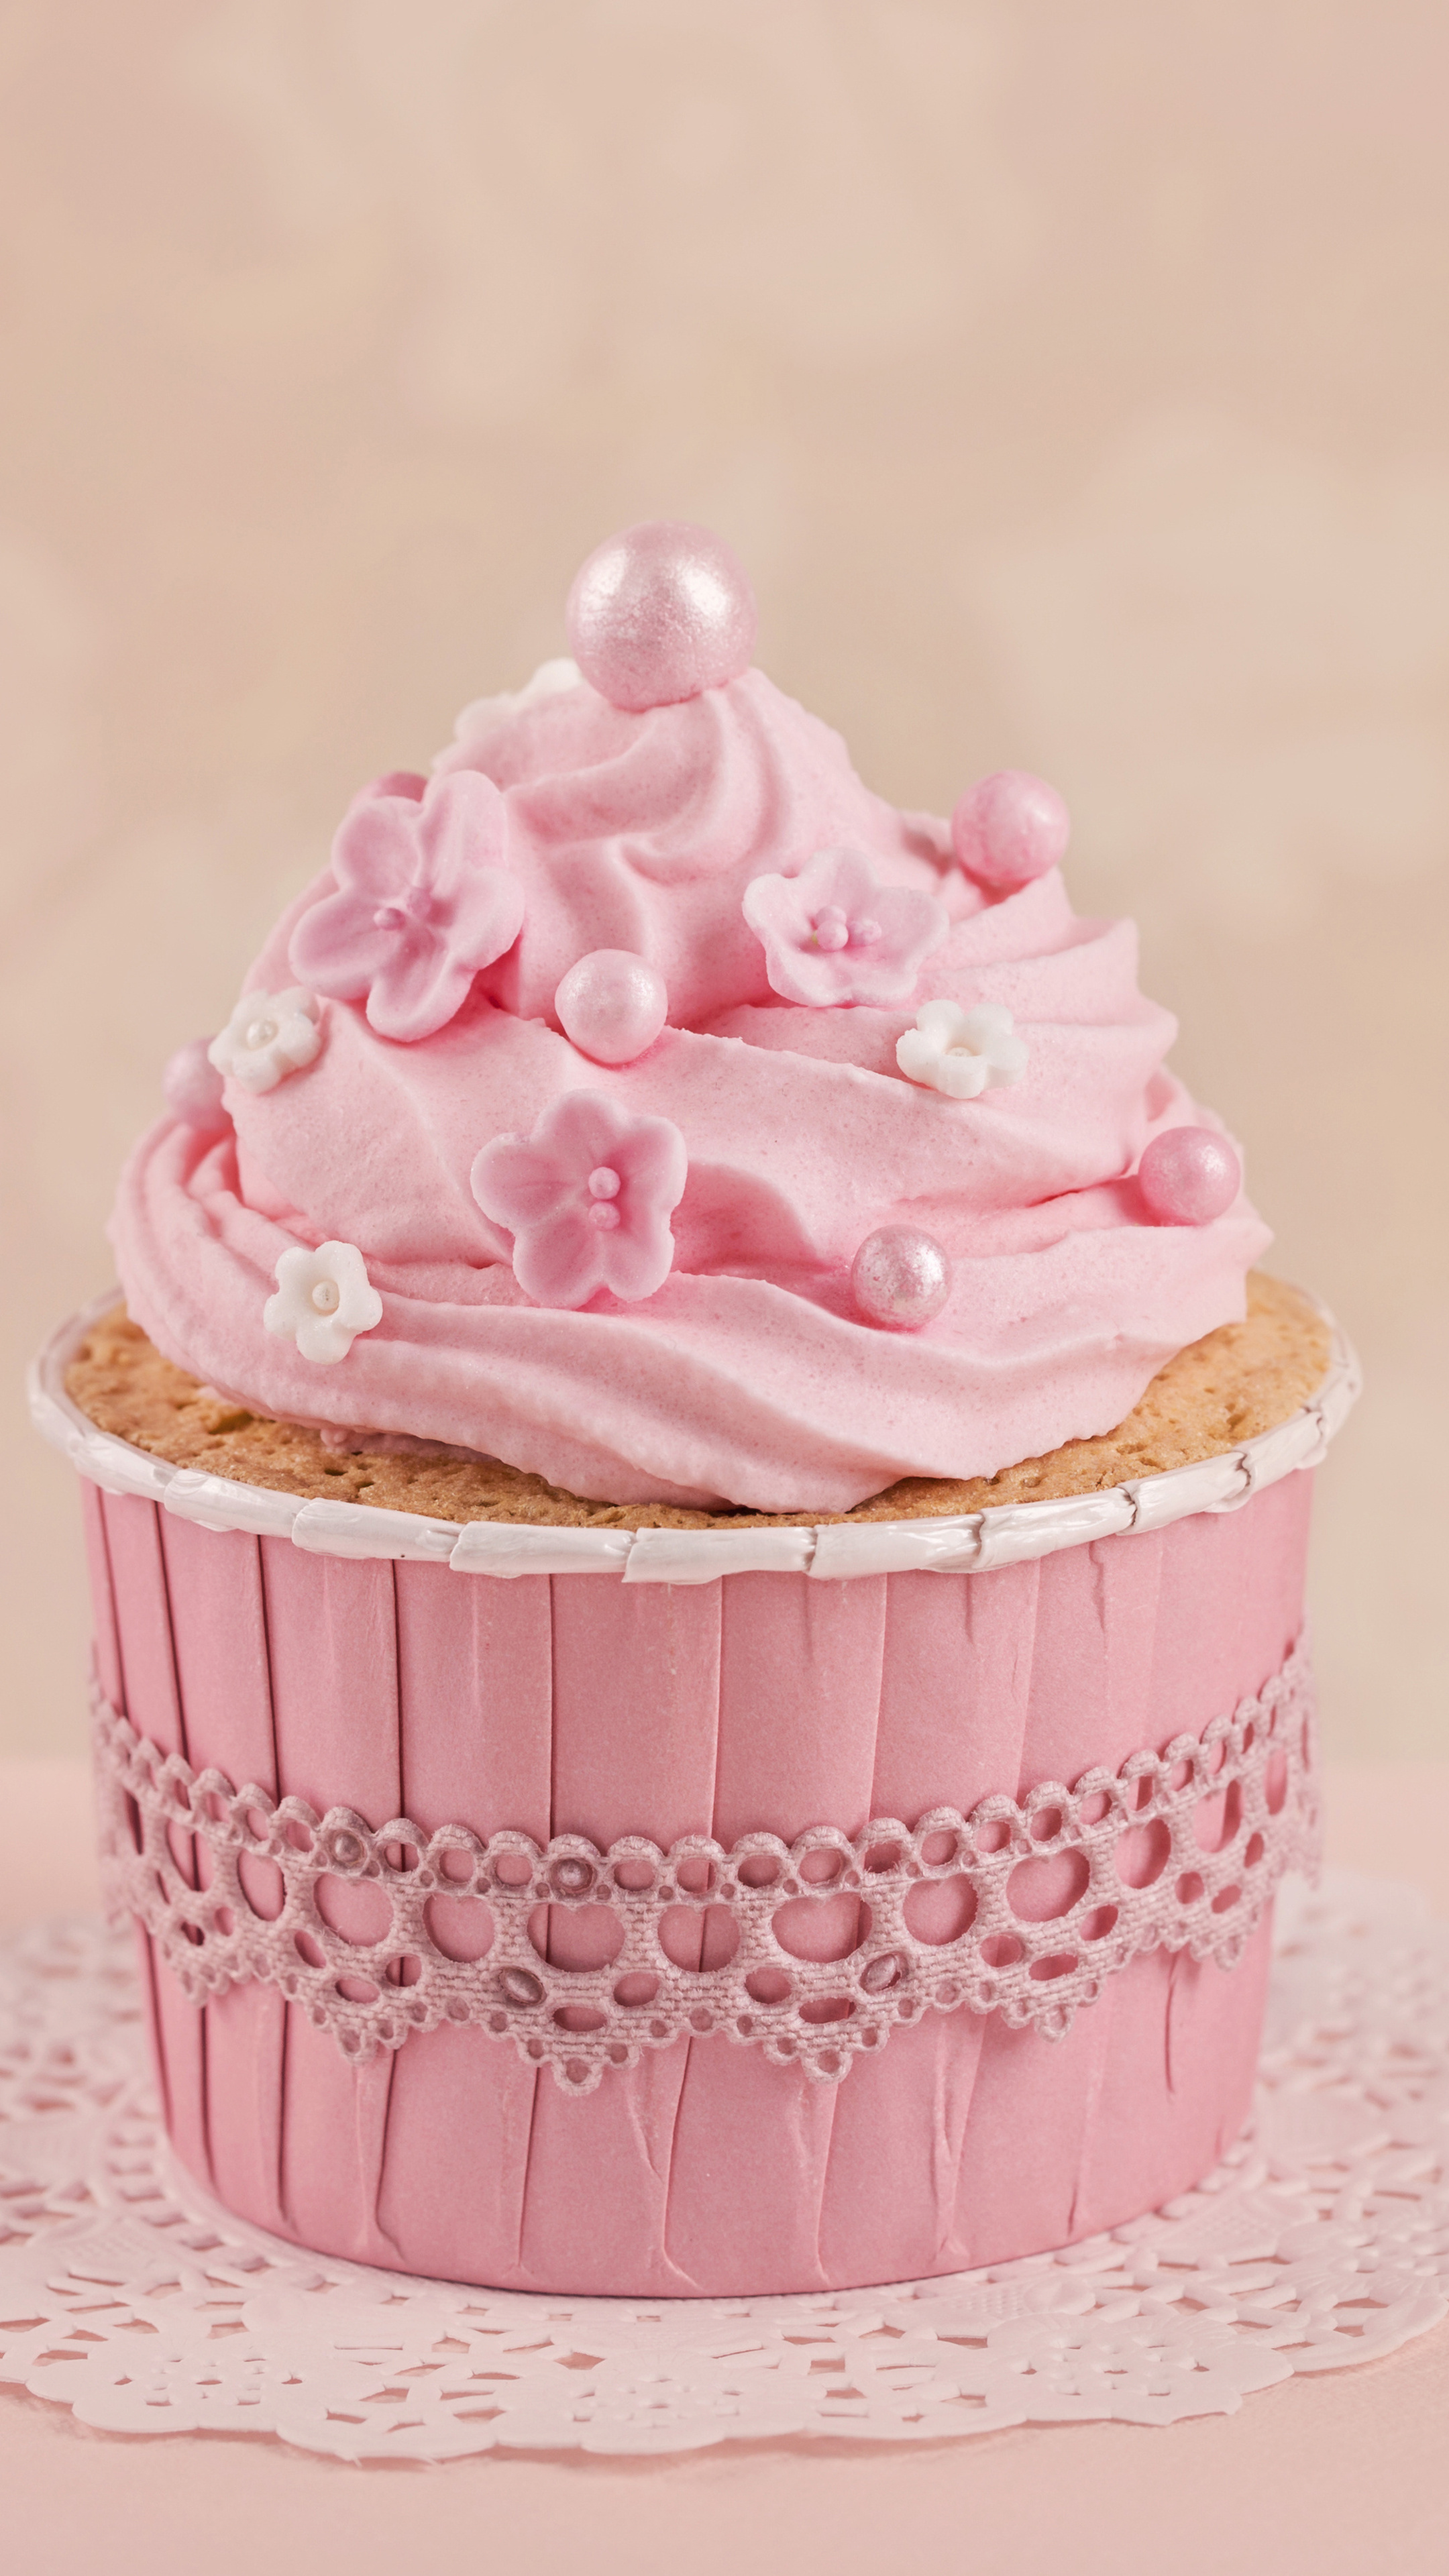 Pink cupcake, Xperia wallpapers, Premium HD images, Colorful delight, 2160x3840 4K Phone